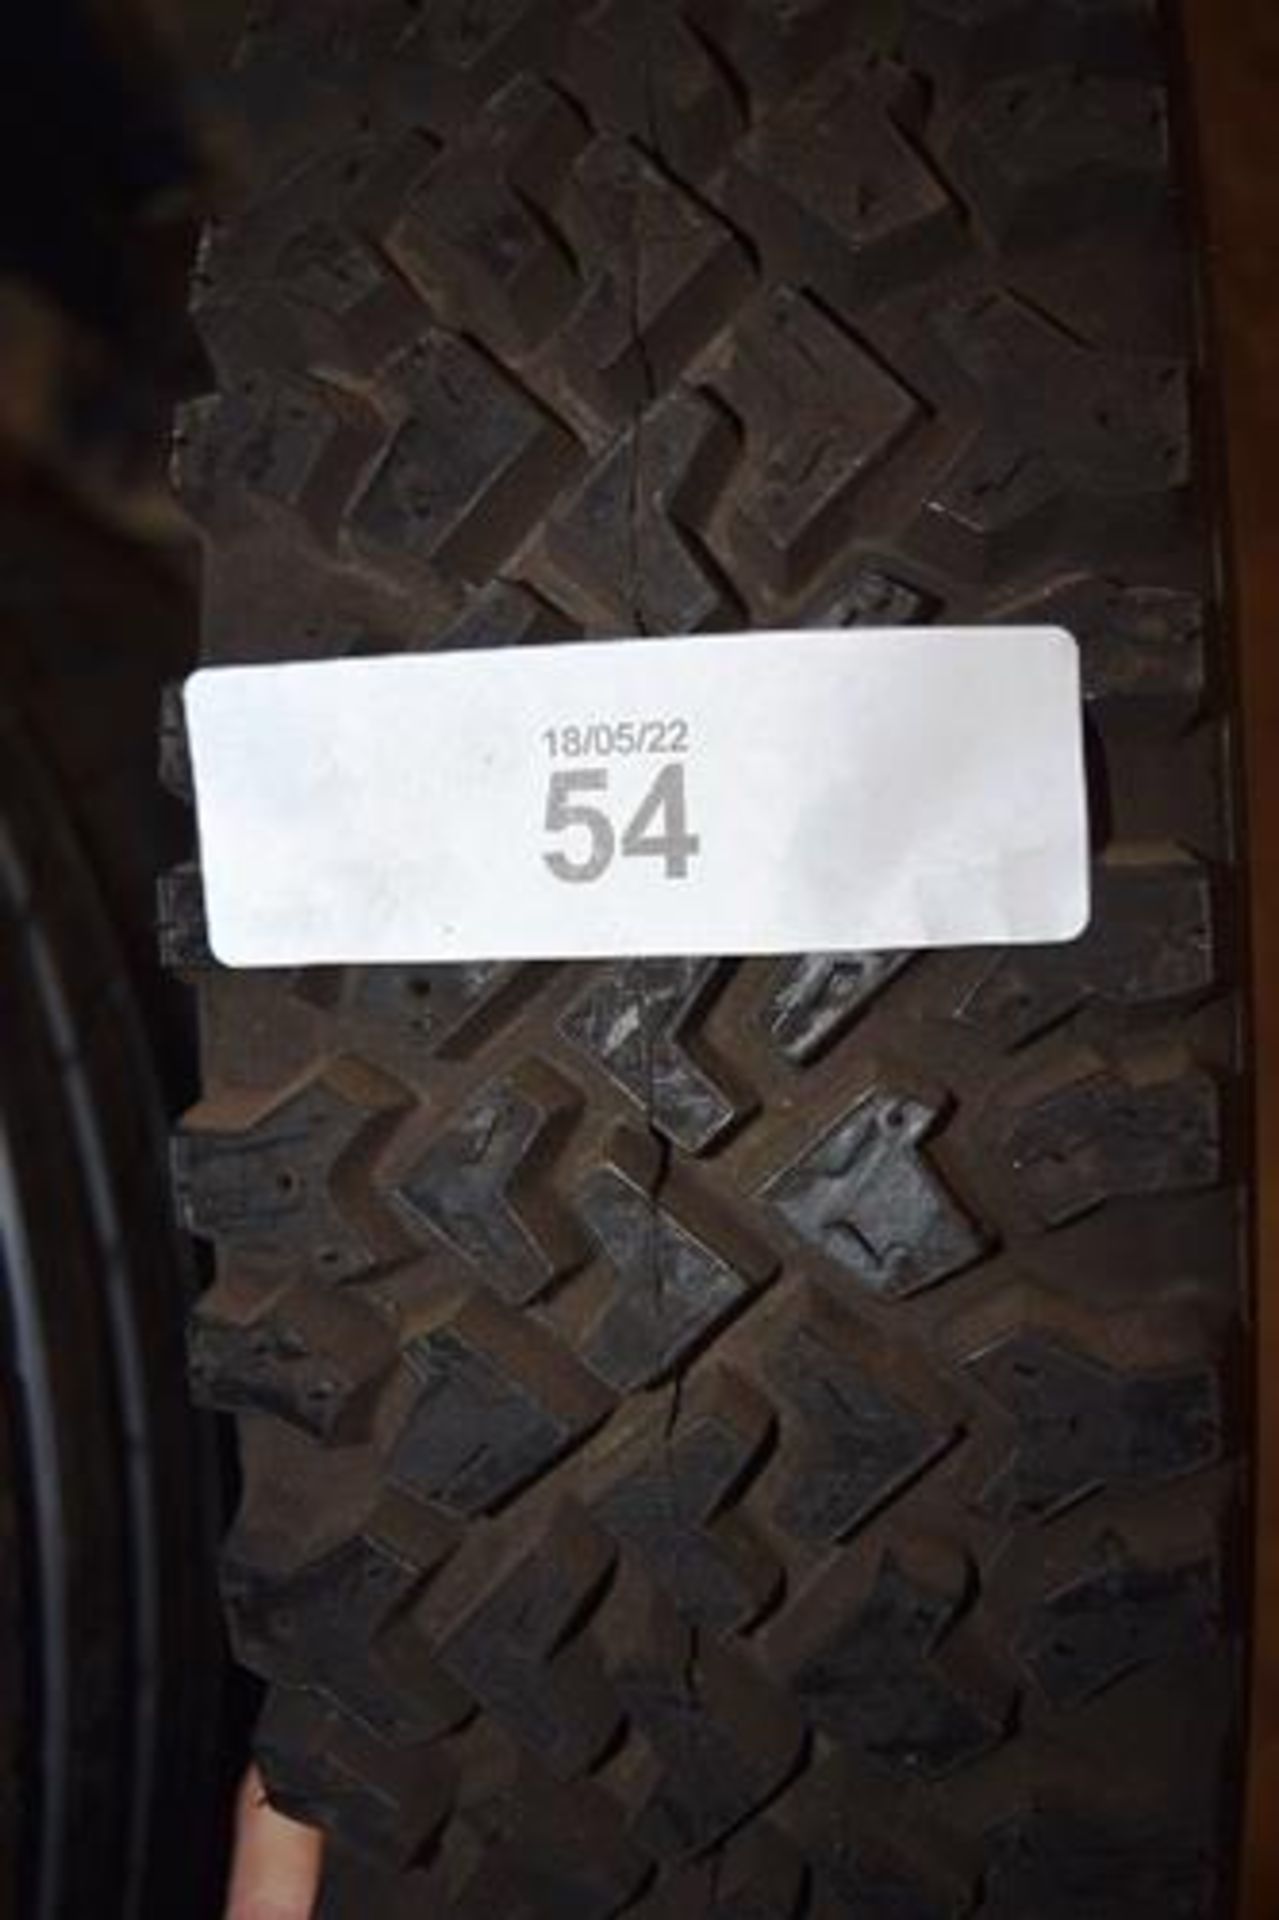 A set of 4 x Sava D741 tyres, size 155/SR12 - New (GS8end) - Image 2 of 2